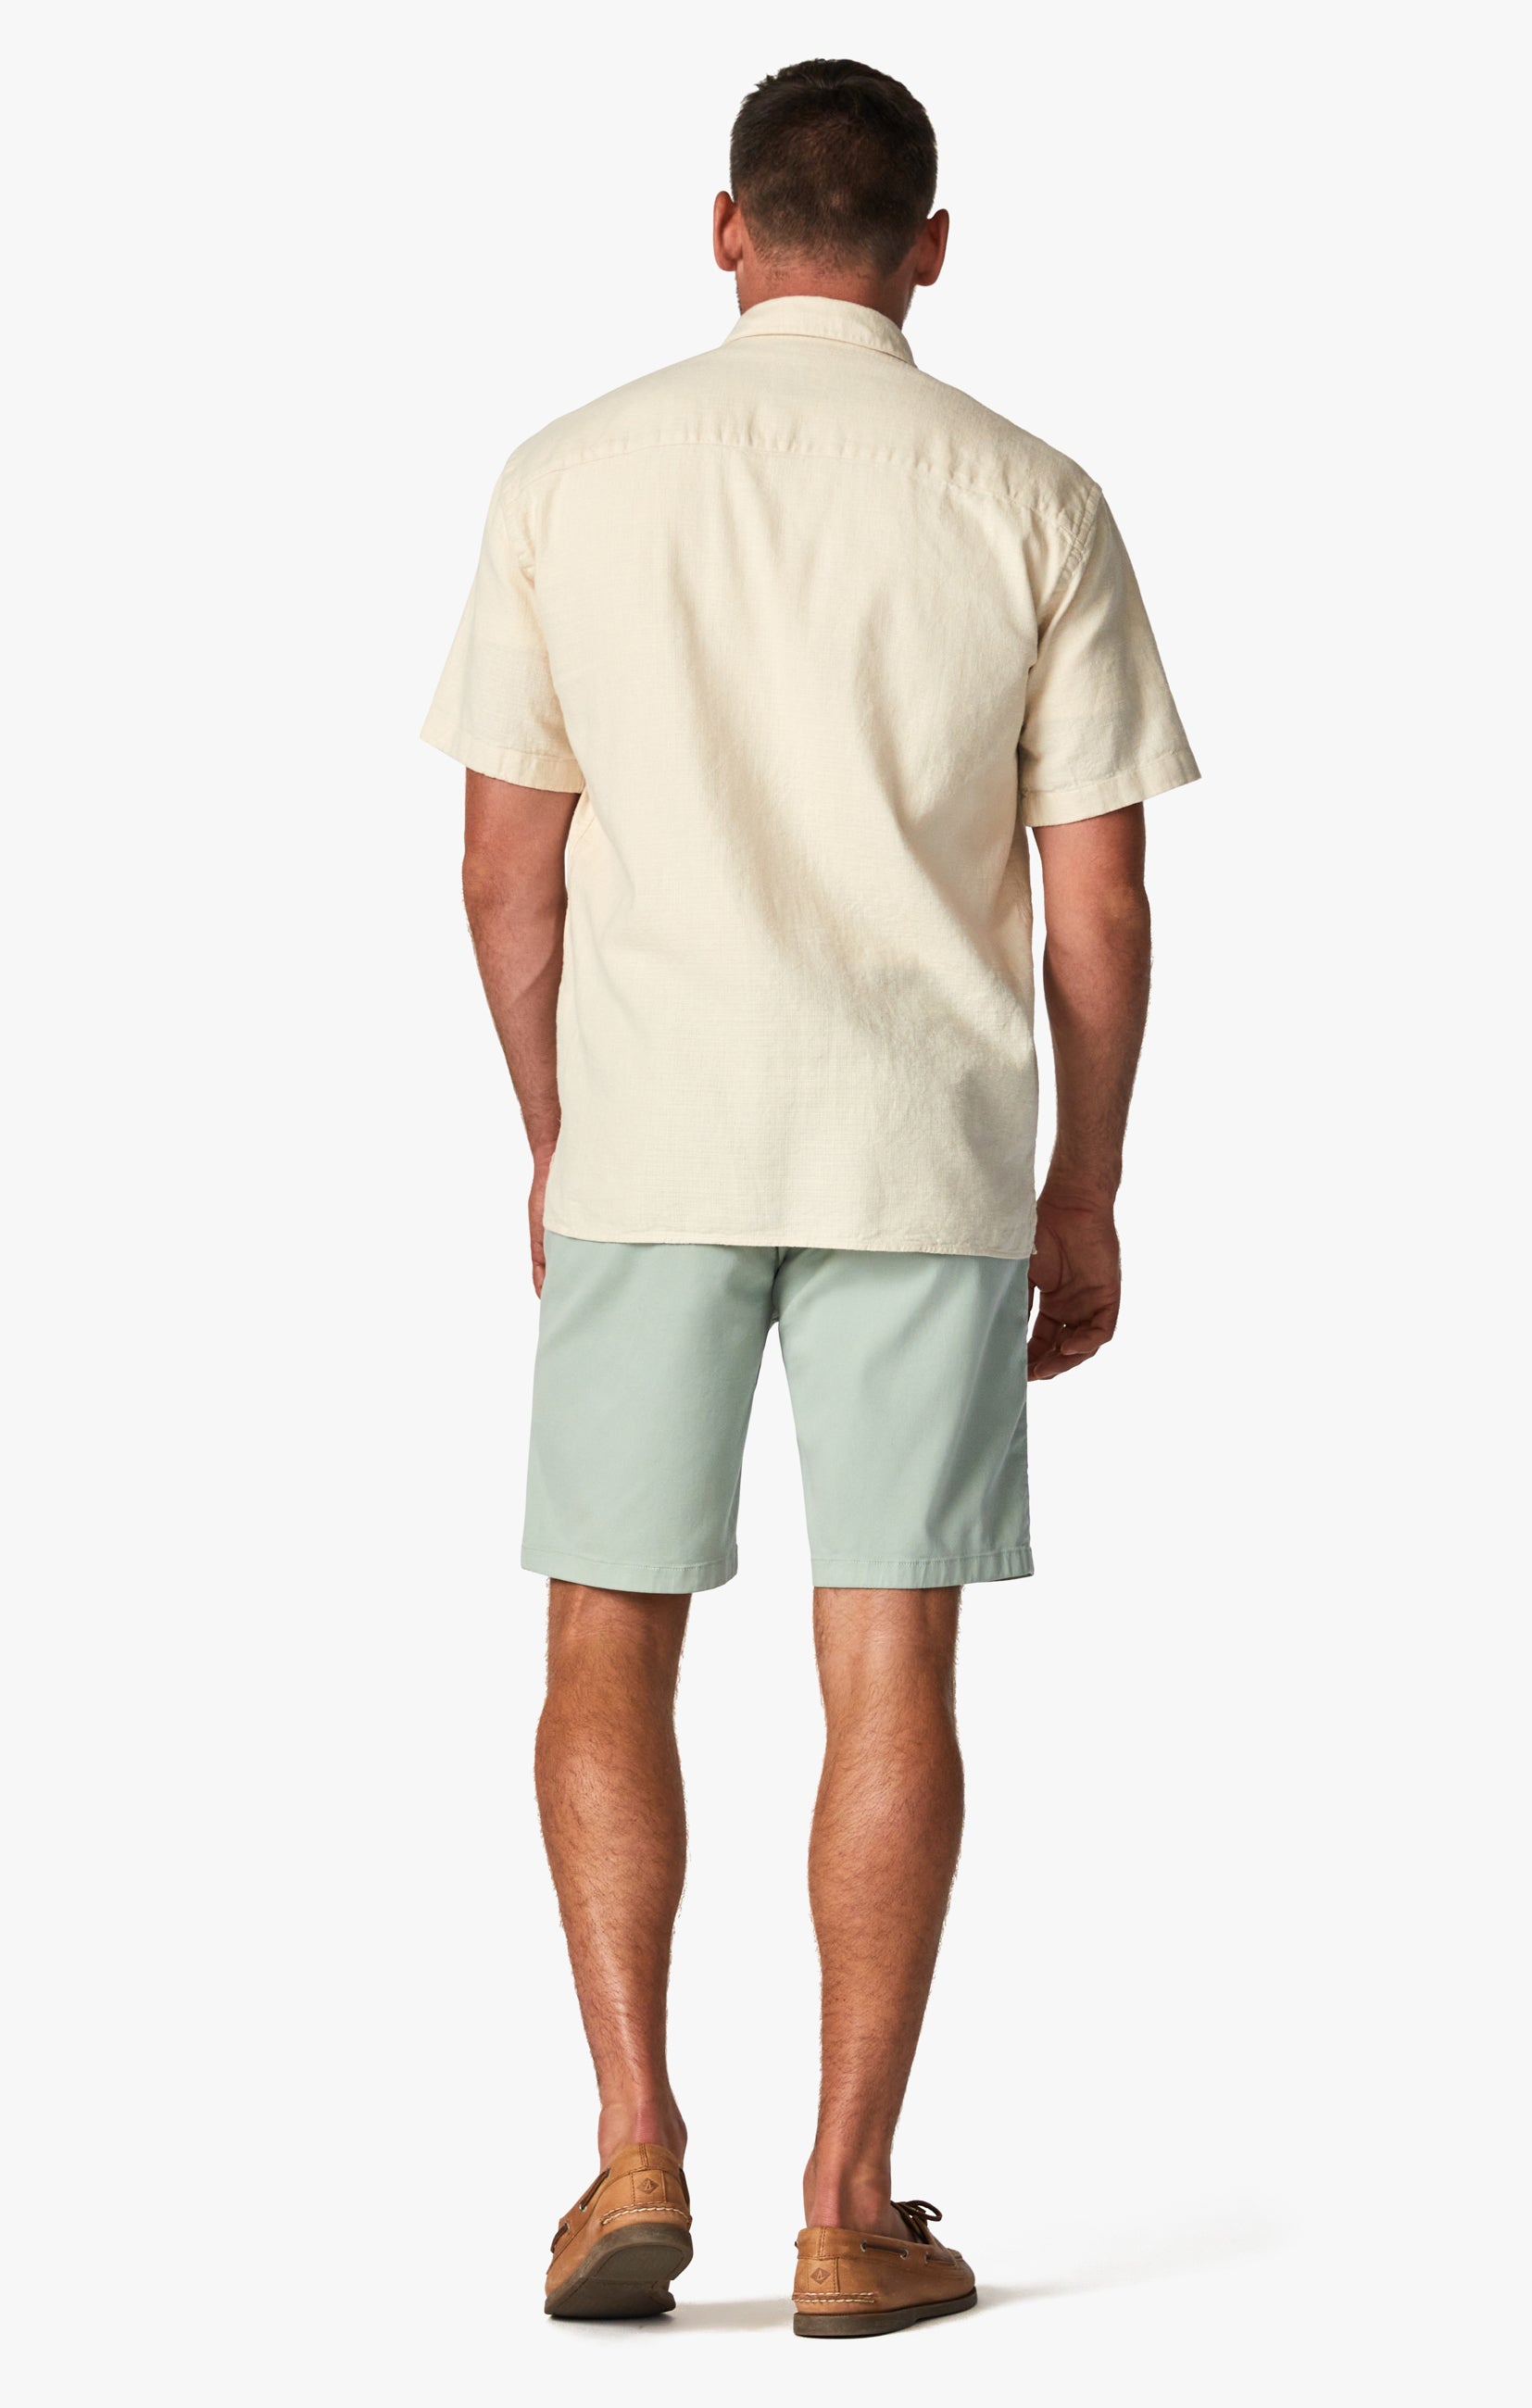 Nevada Shorts In Mint Soft Touch Image 2